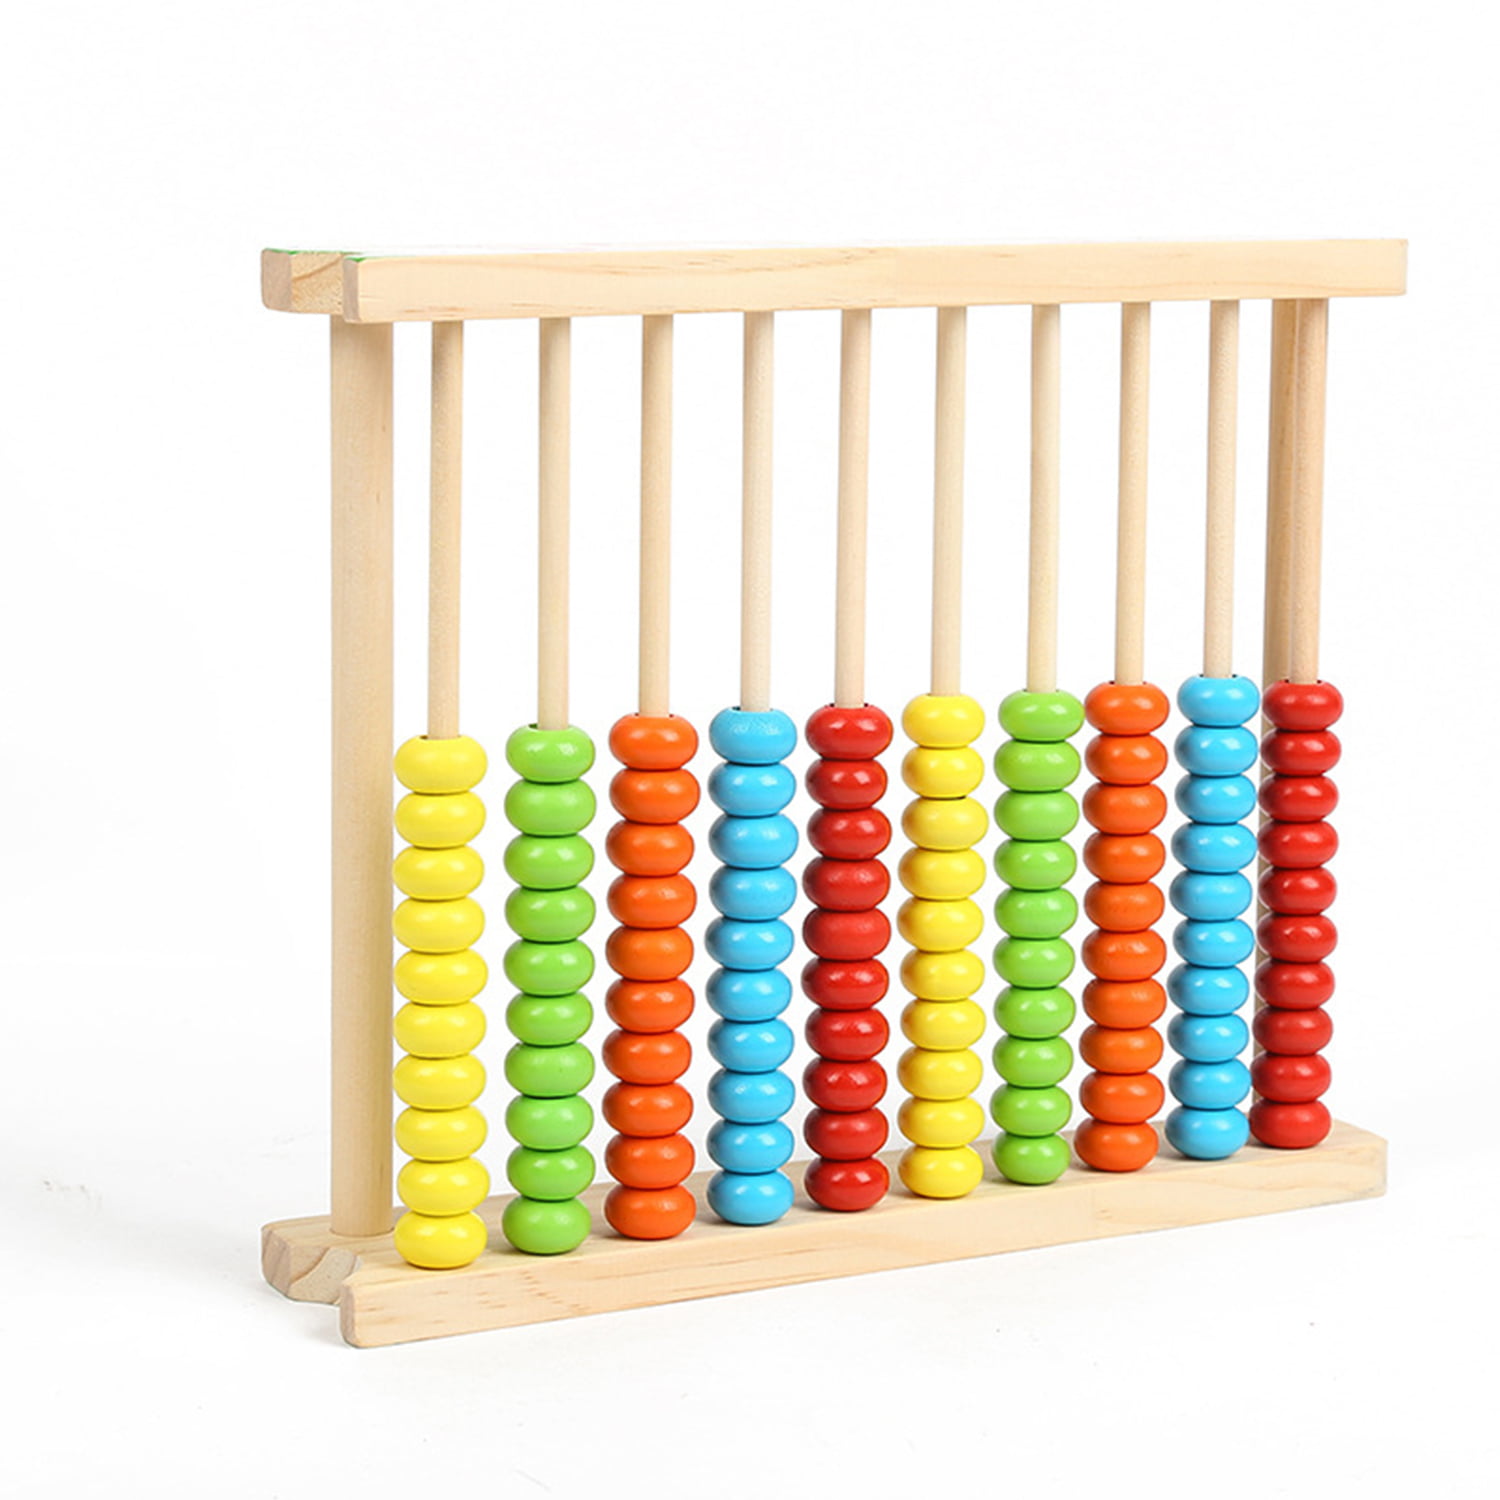 Miniature Counting Frame Wooden Abacus Frame Mathematics Abacus Multi Function Arithmetic Tools Number Style Calculation Tool for Students Teachers 1pc 